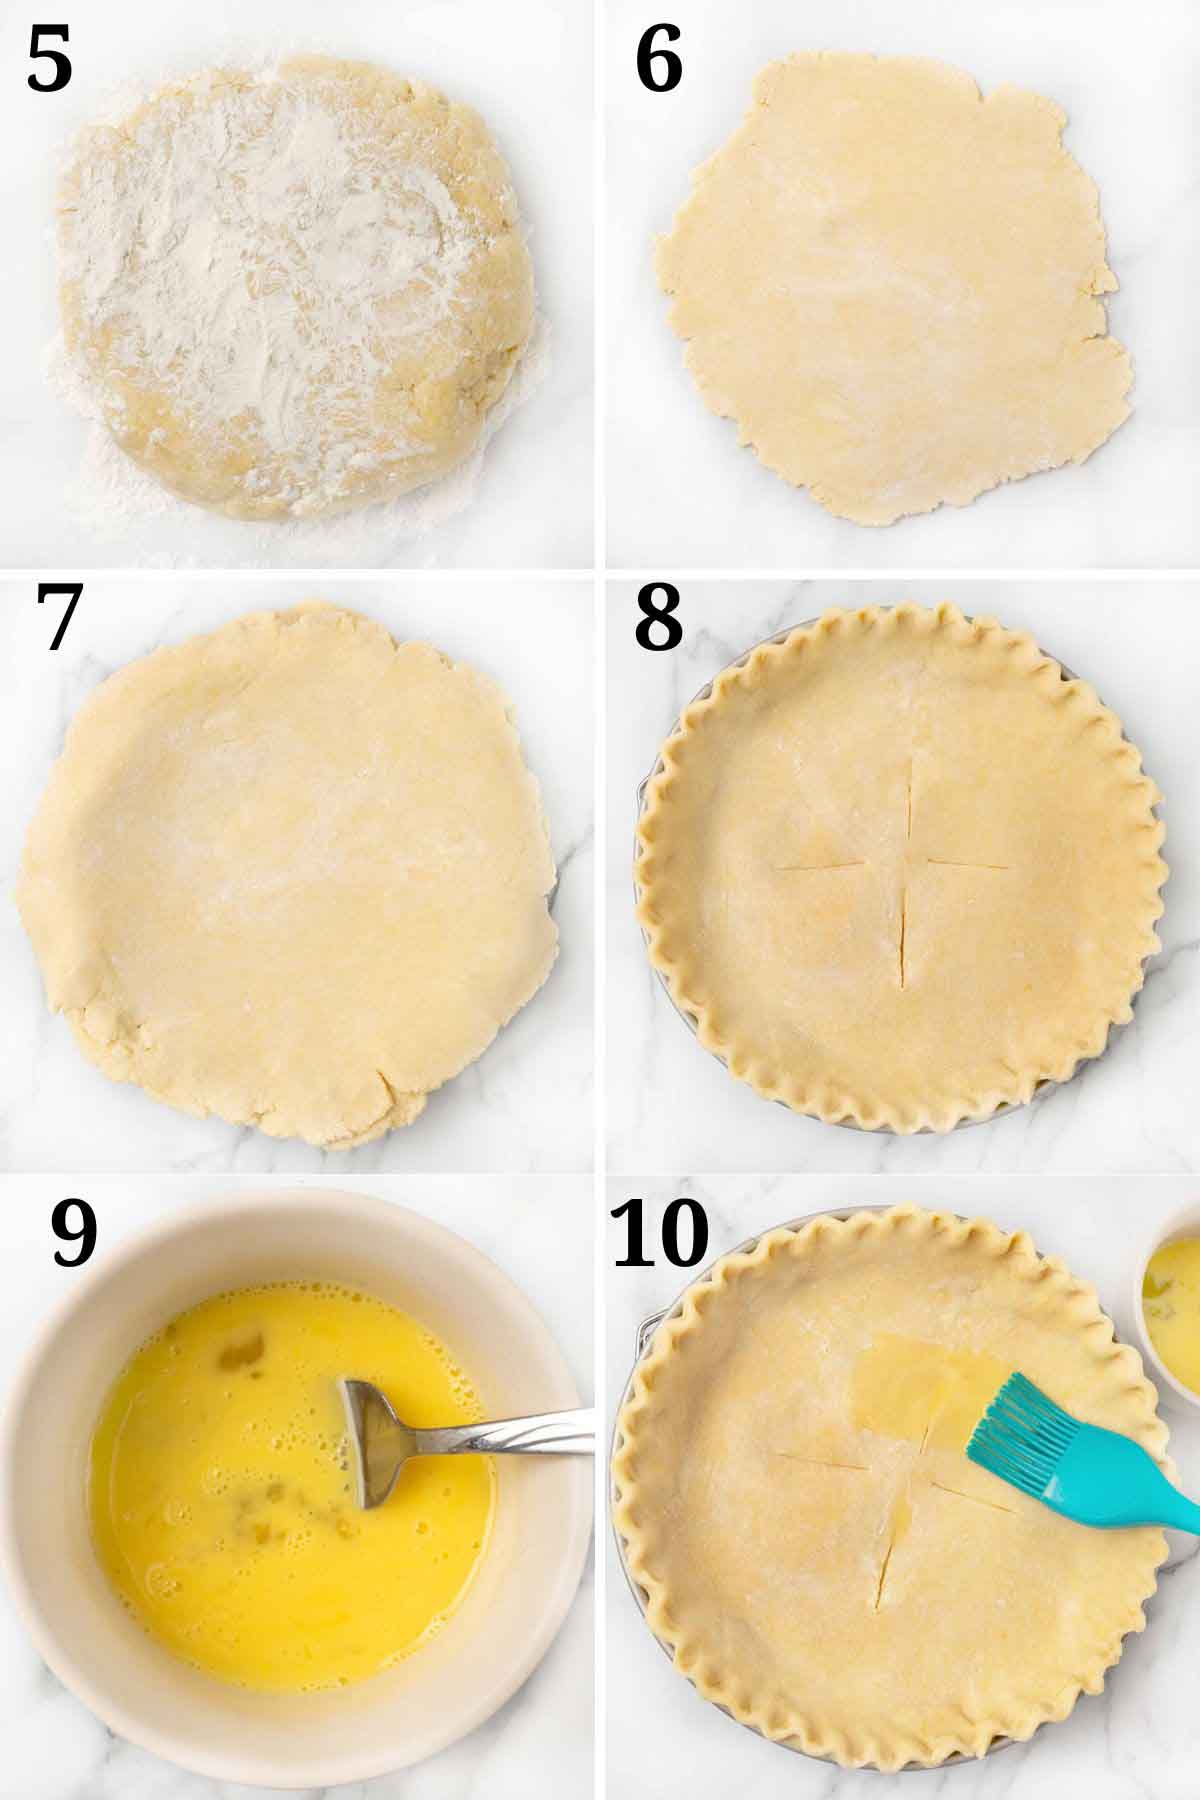 Collage showing how to finish pie assembly.